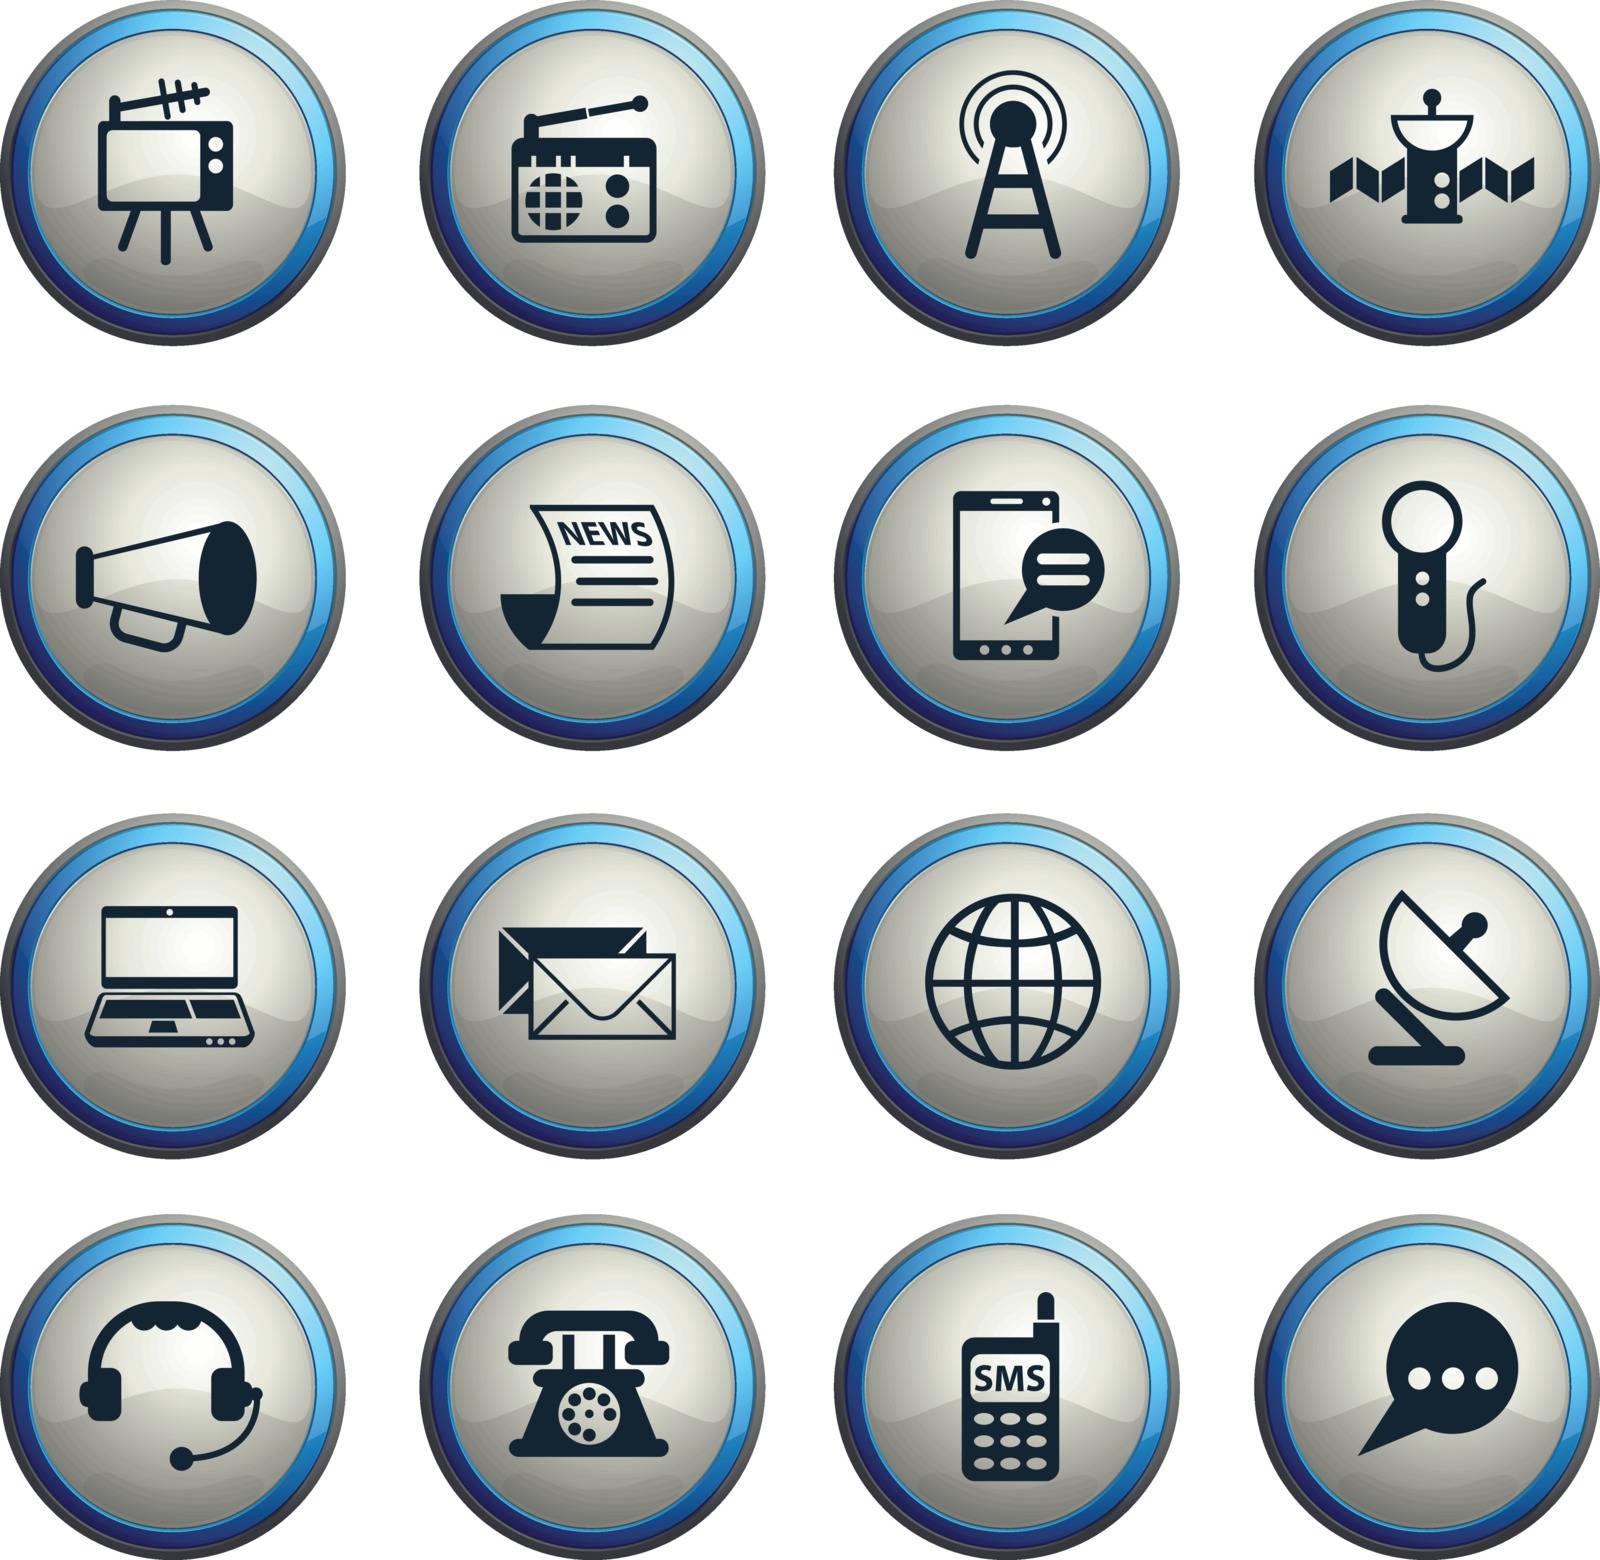 media vector icons for web and user interface design